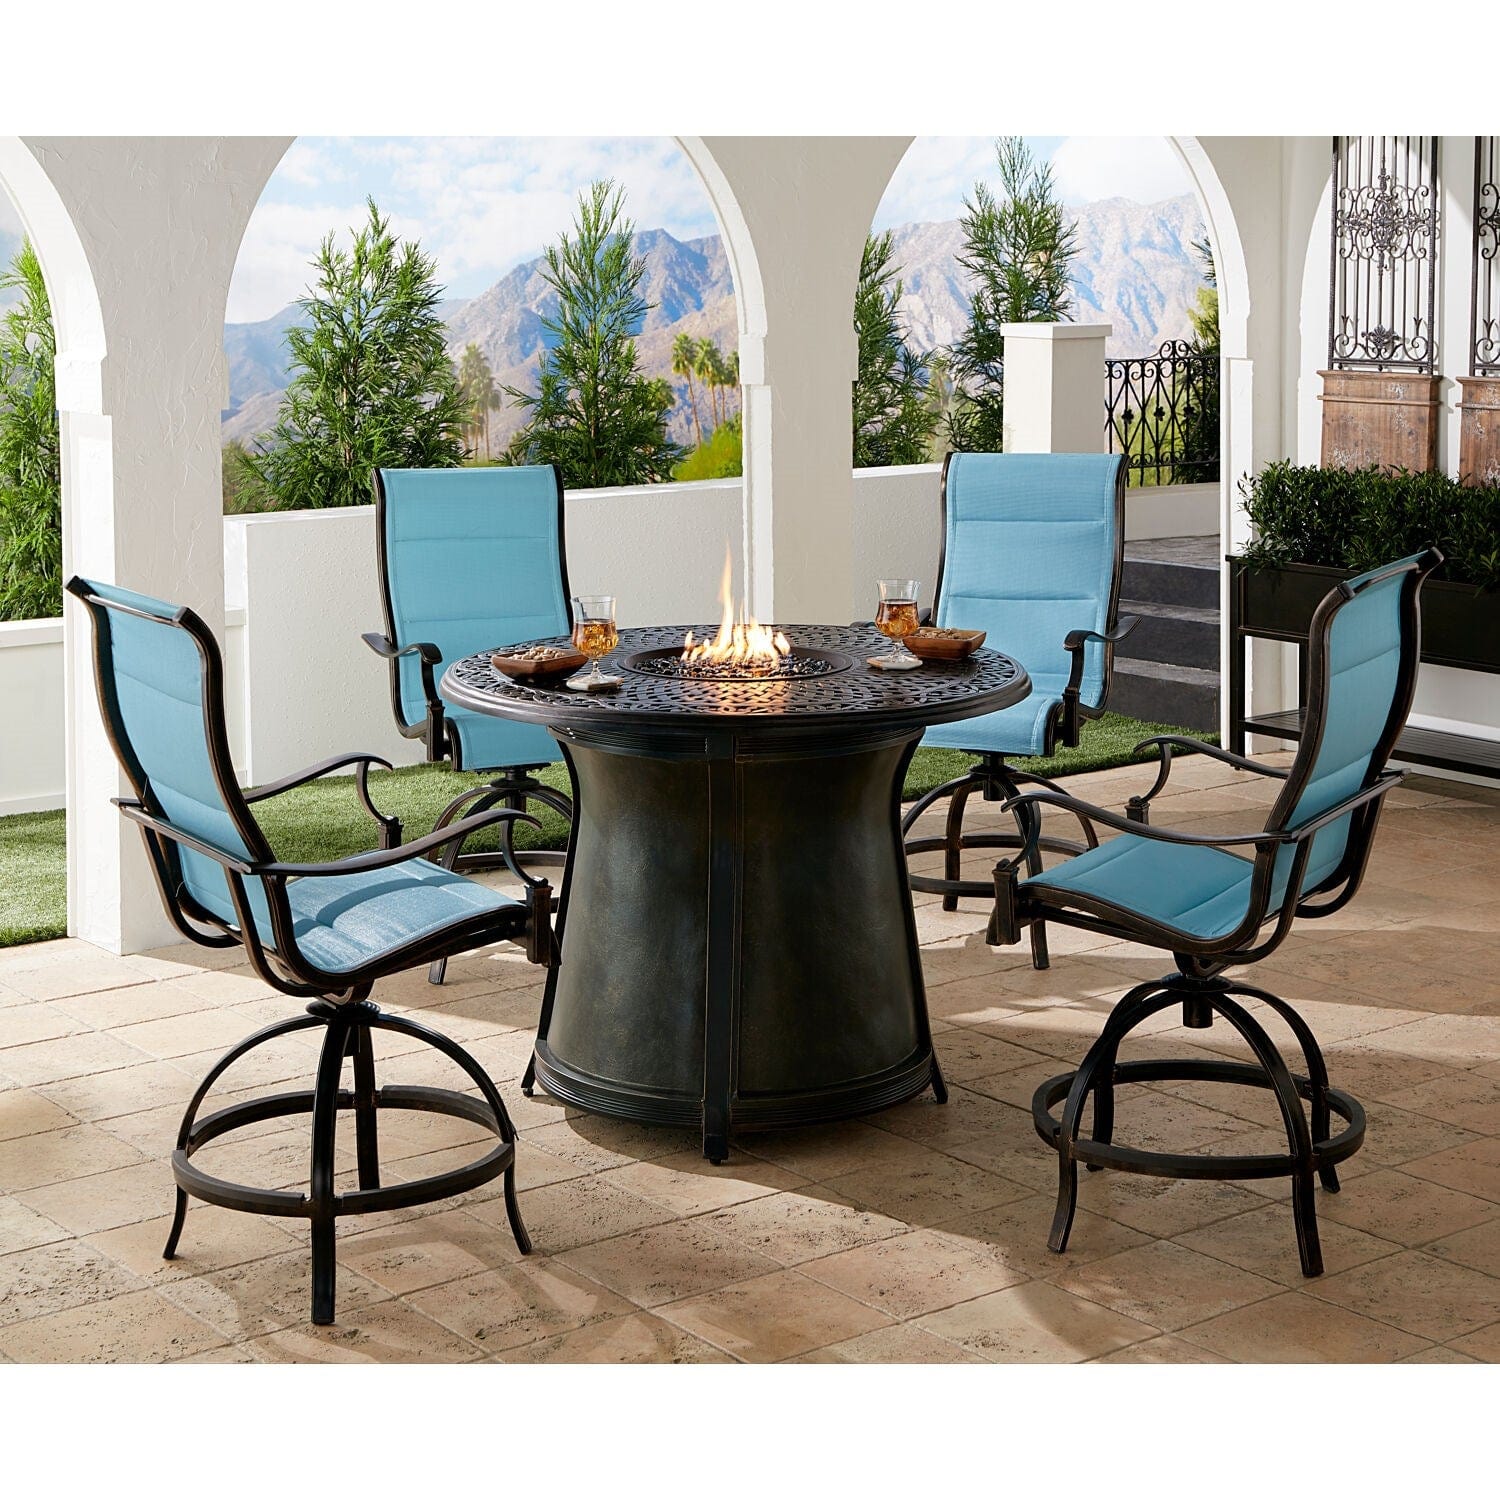 Hanover Fire Pit Chat Set Hanover Traditions 5-Piece Aluminium Frame High-Dining Set in Blue with 4 Padded Counter-Height Swivel Chairs and 40,000 BTU Cast-top Fire Pit Table | TRAD5PCPFPDRD-BR-B